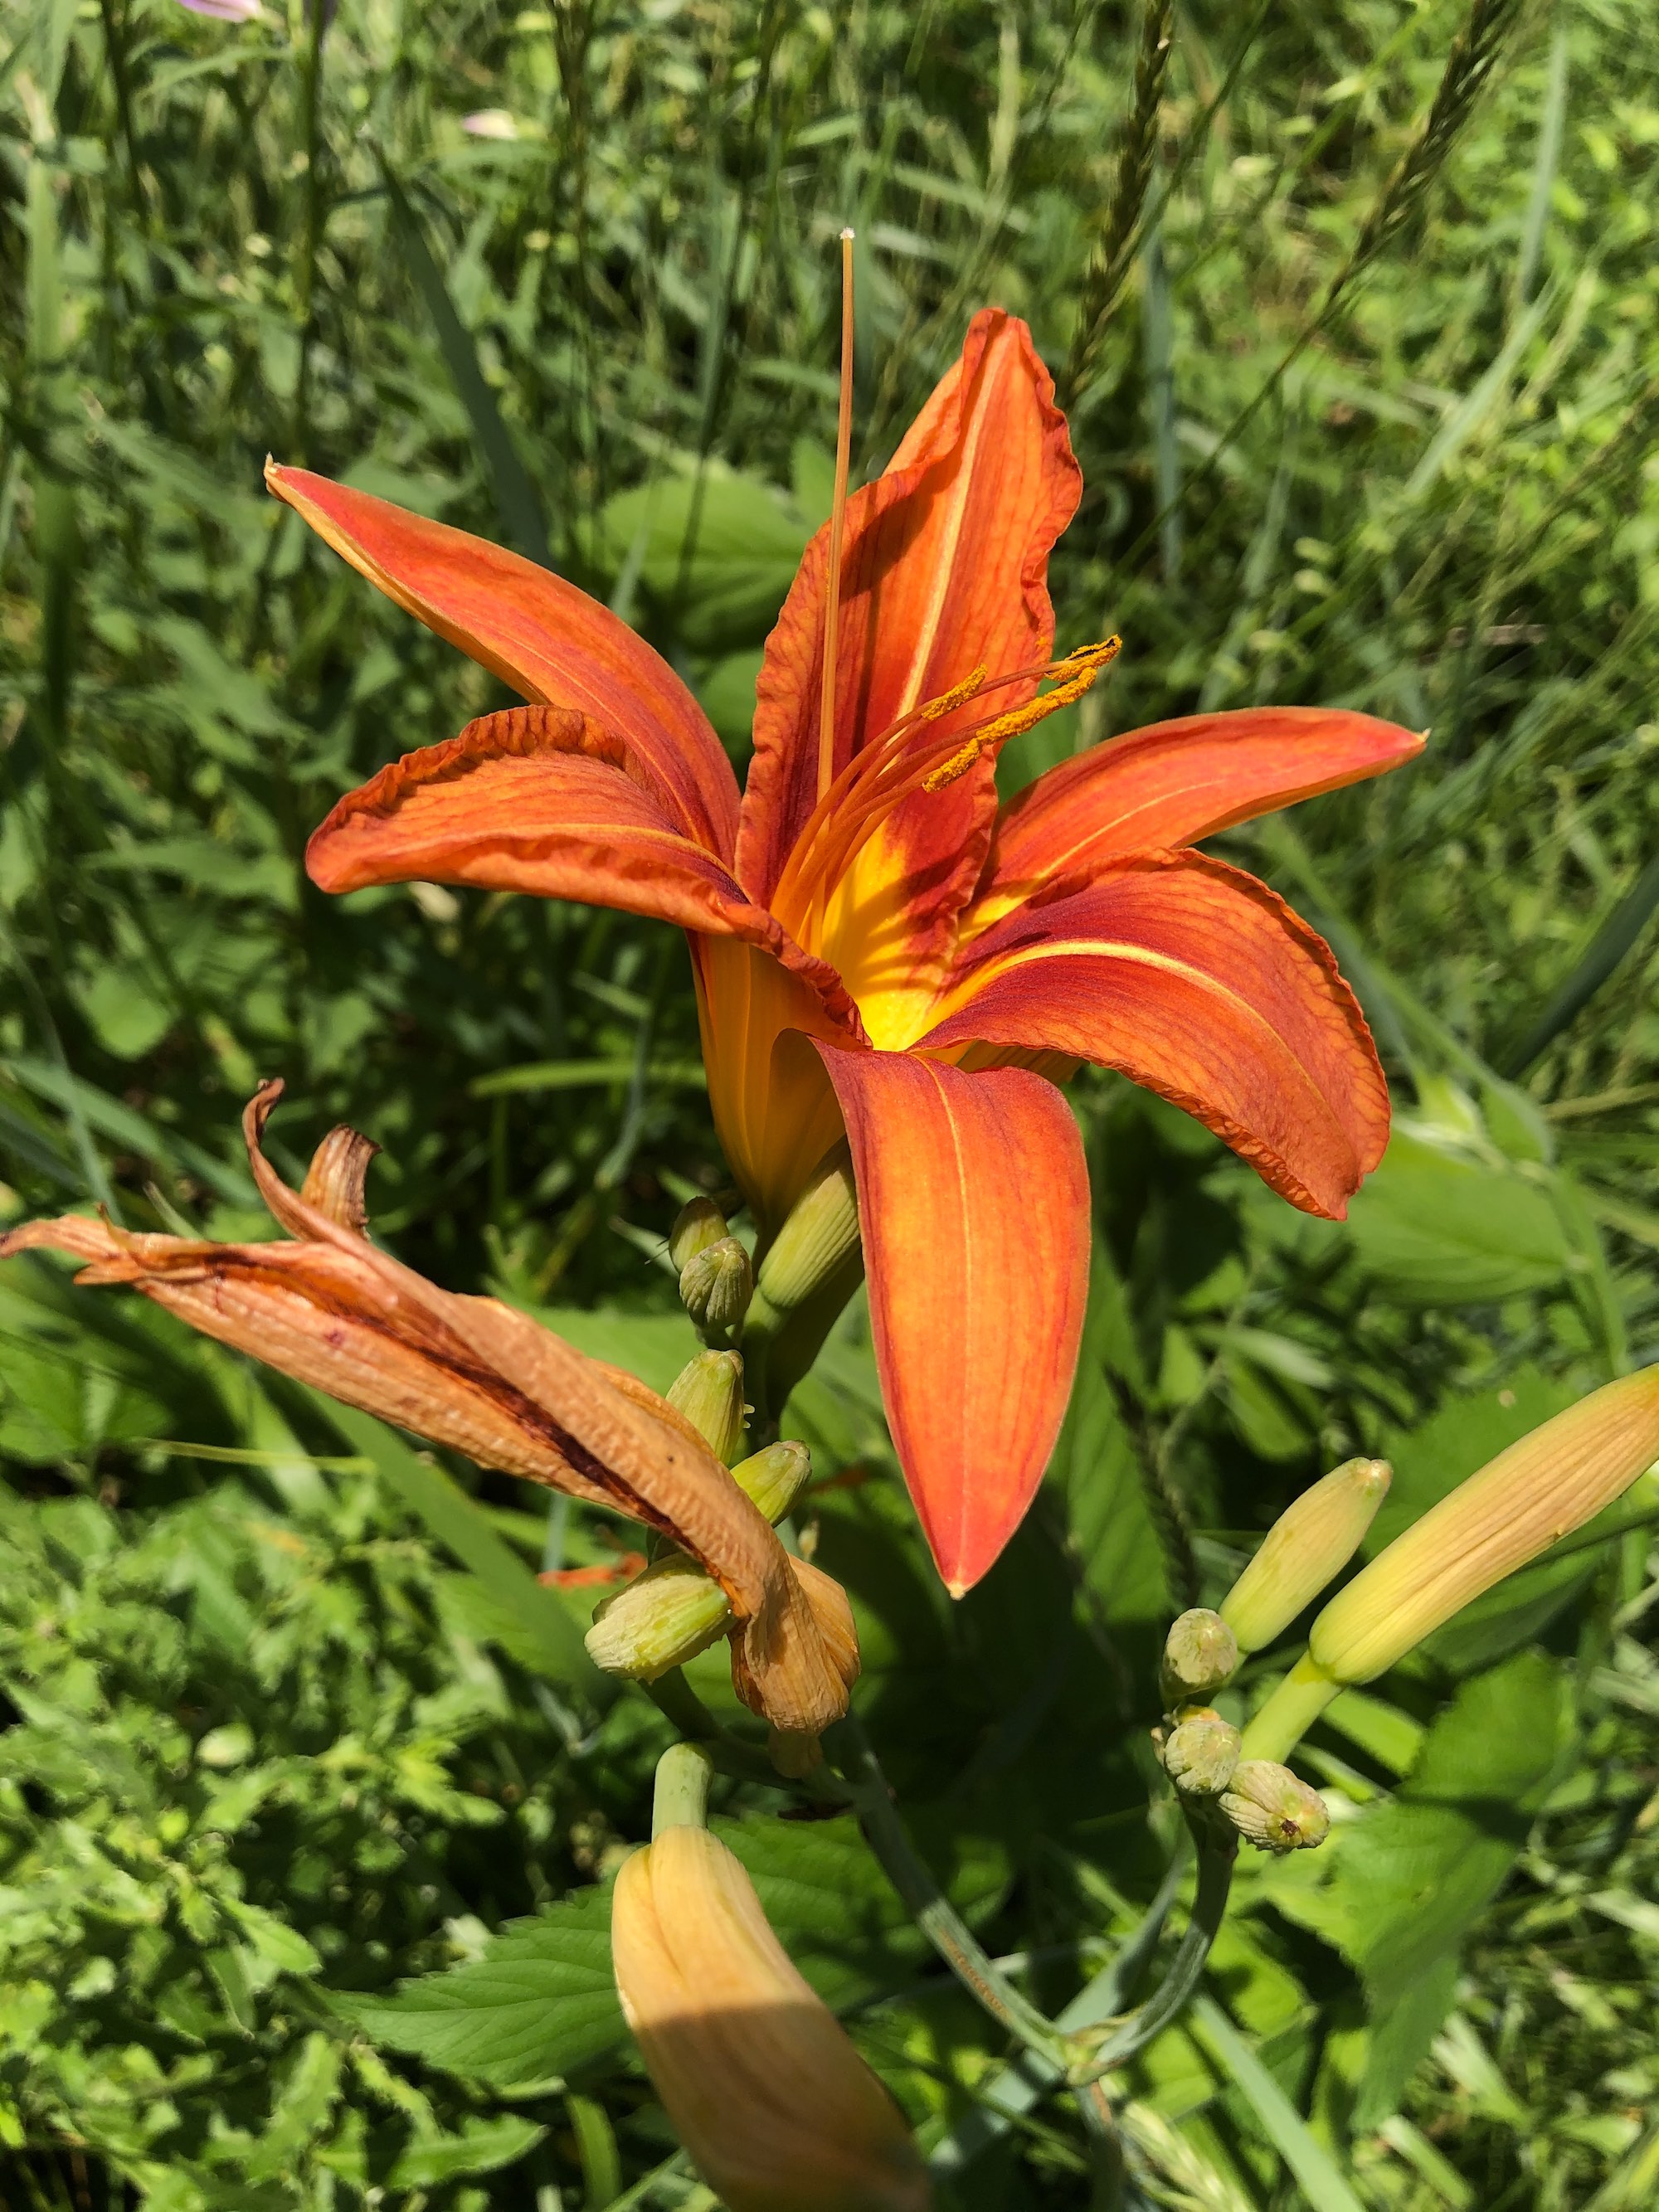 Orange Day Lily in Nakoma yard in Madison, Wisconsin on June 30, 2020.